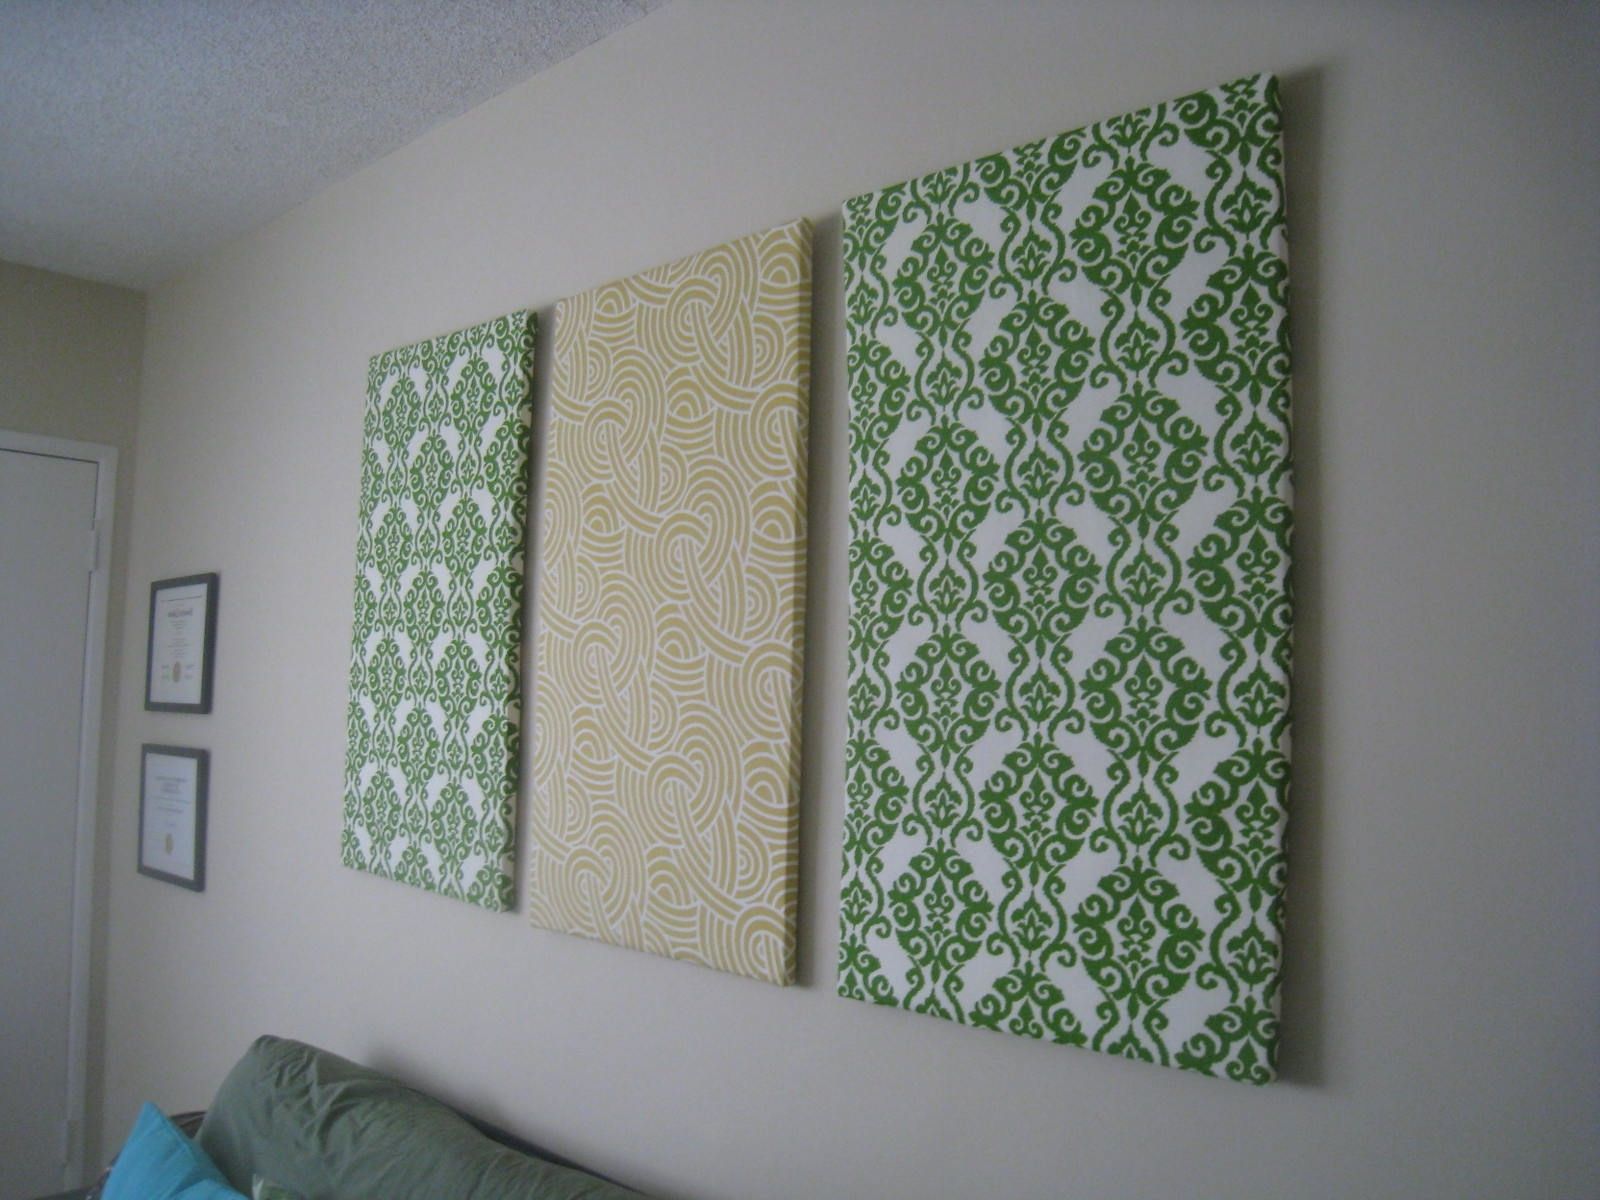 Most Recent Diy Fabric Wall Art With Art: Fabric Wall Art Diy (View 12 of 15)